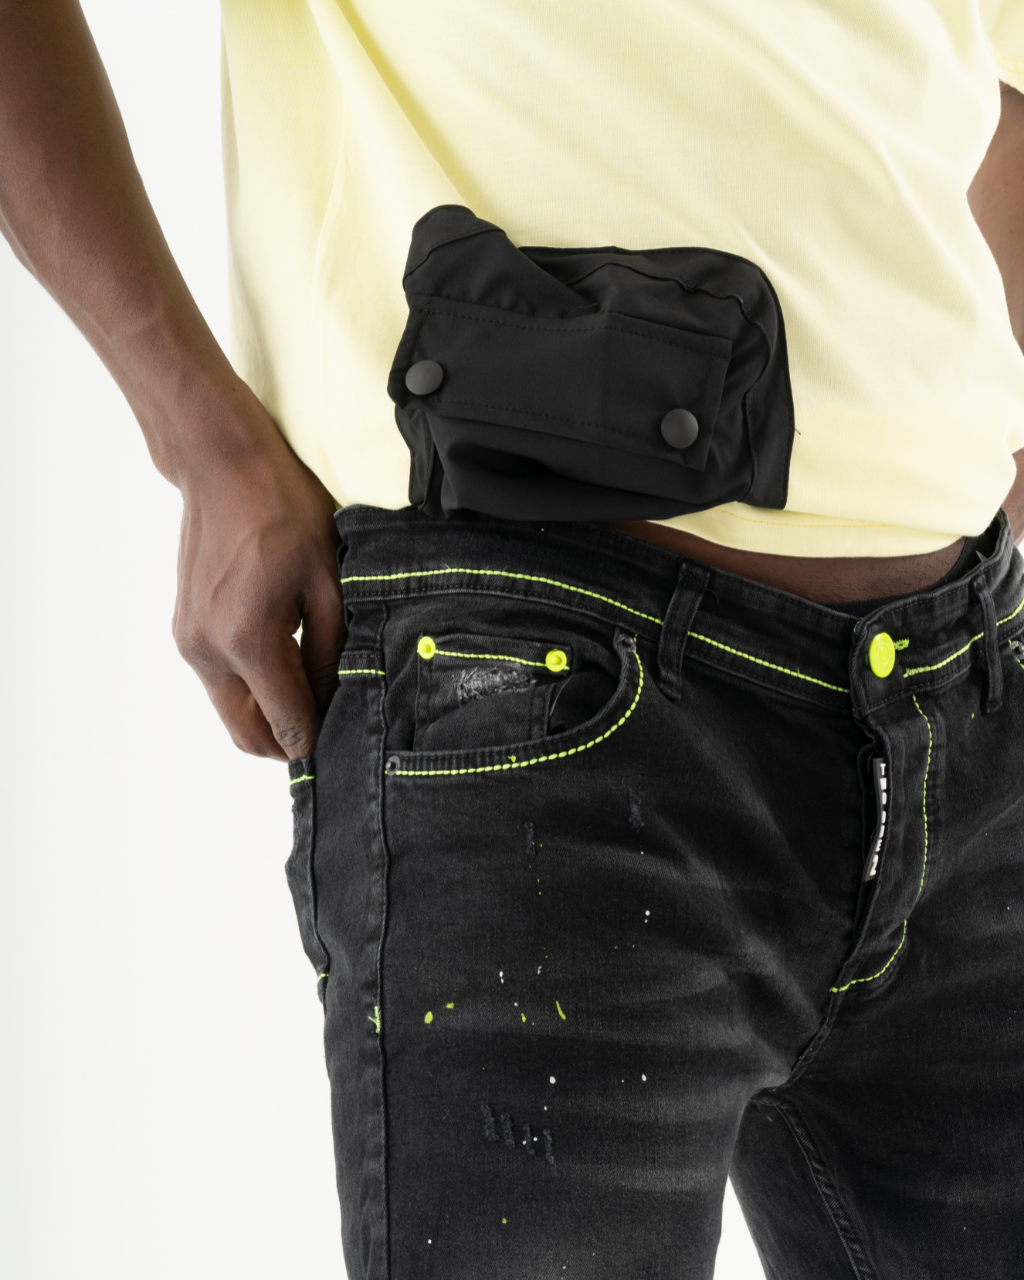 A man wearing ripped jeans is holding a black TWILIGHT in his pocket.